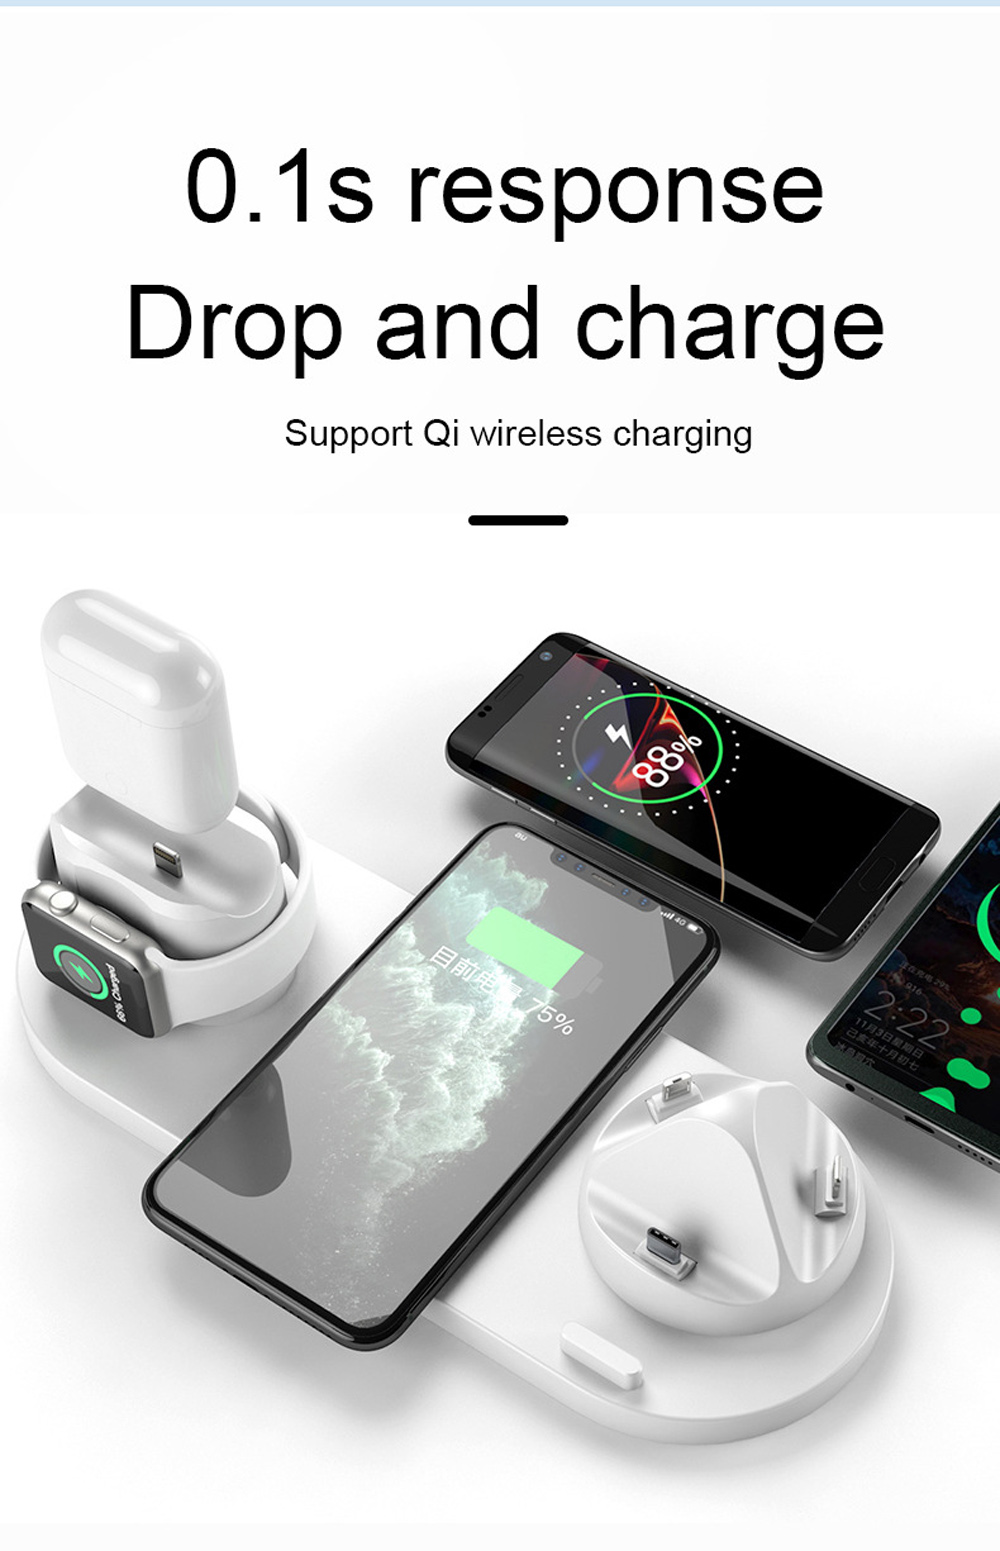 2022 Wireless Charger for iPhone 12 Pro for iphon Fast charger10W Fast Charging Pad for Apple Watch 6 in 1 Charging Dock Station